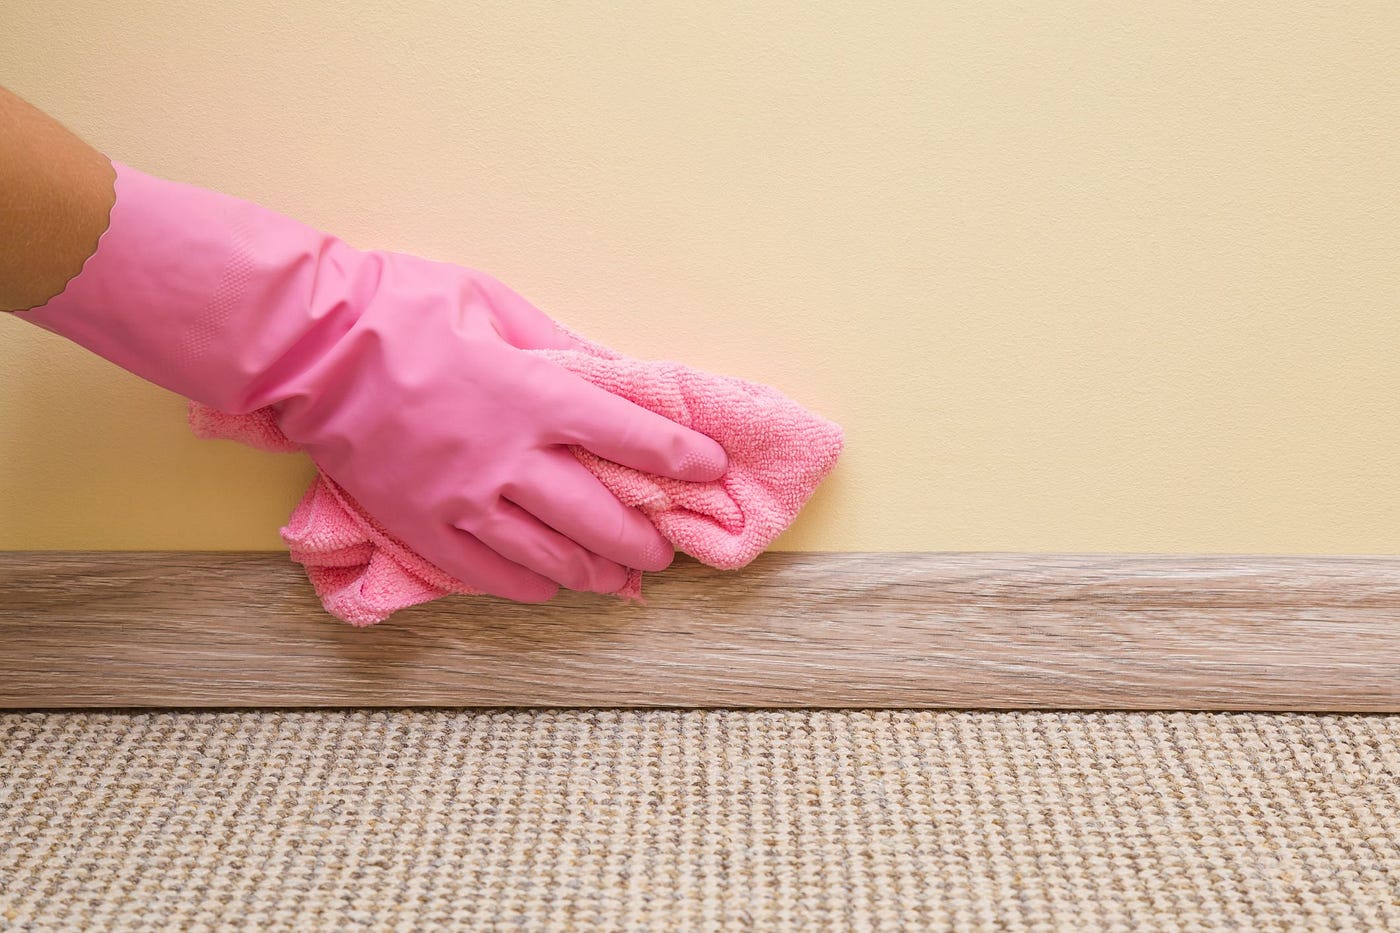 Top 3 Ways To Clean Your Fabric Wall Covering - Embassy Cleaners